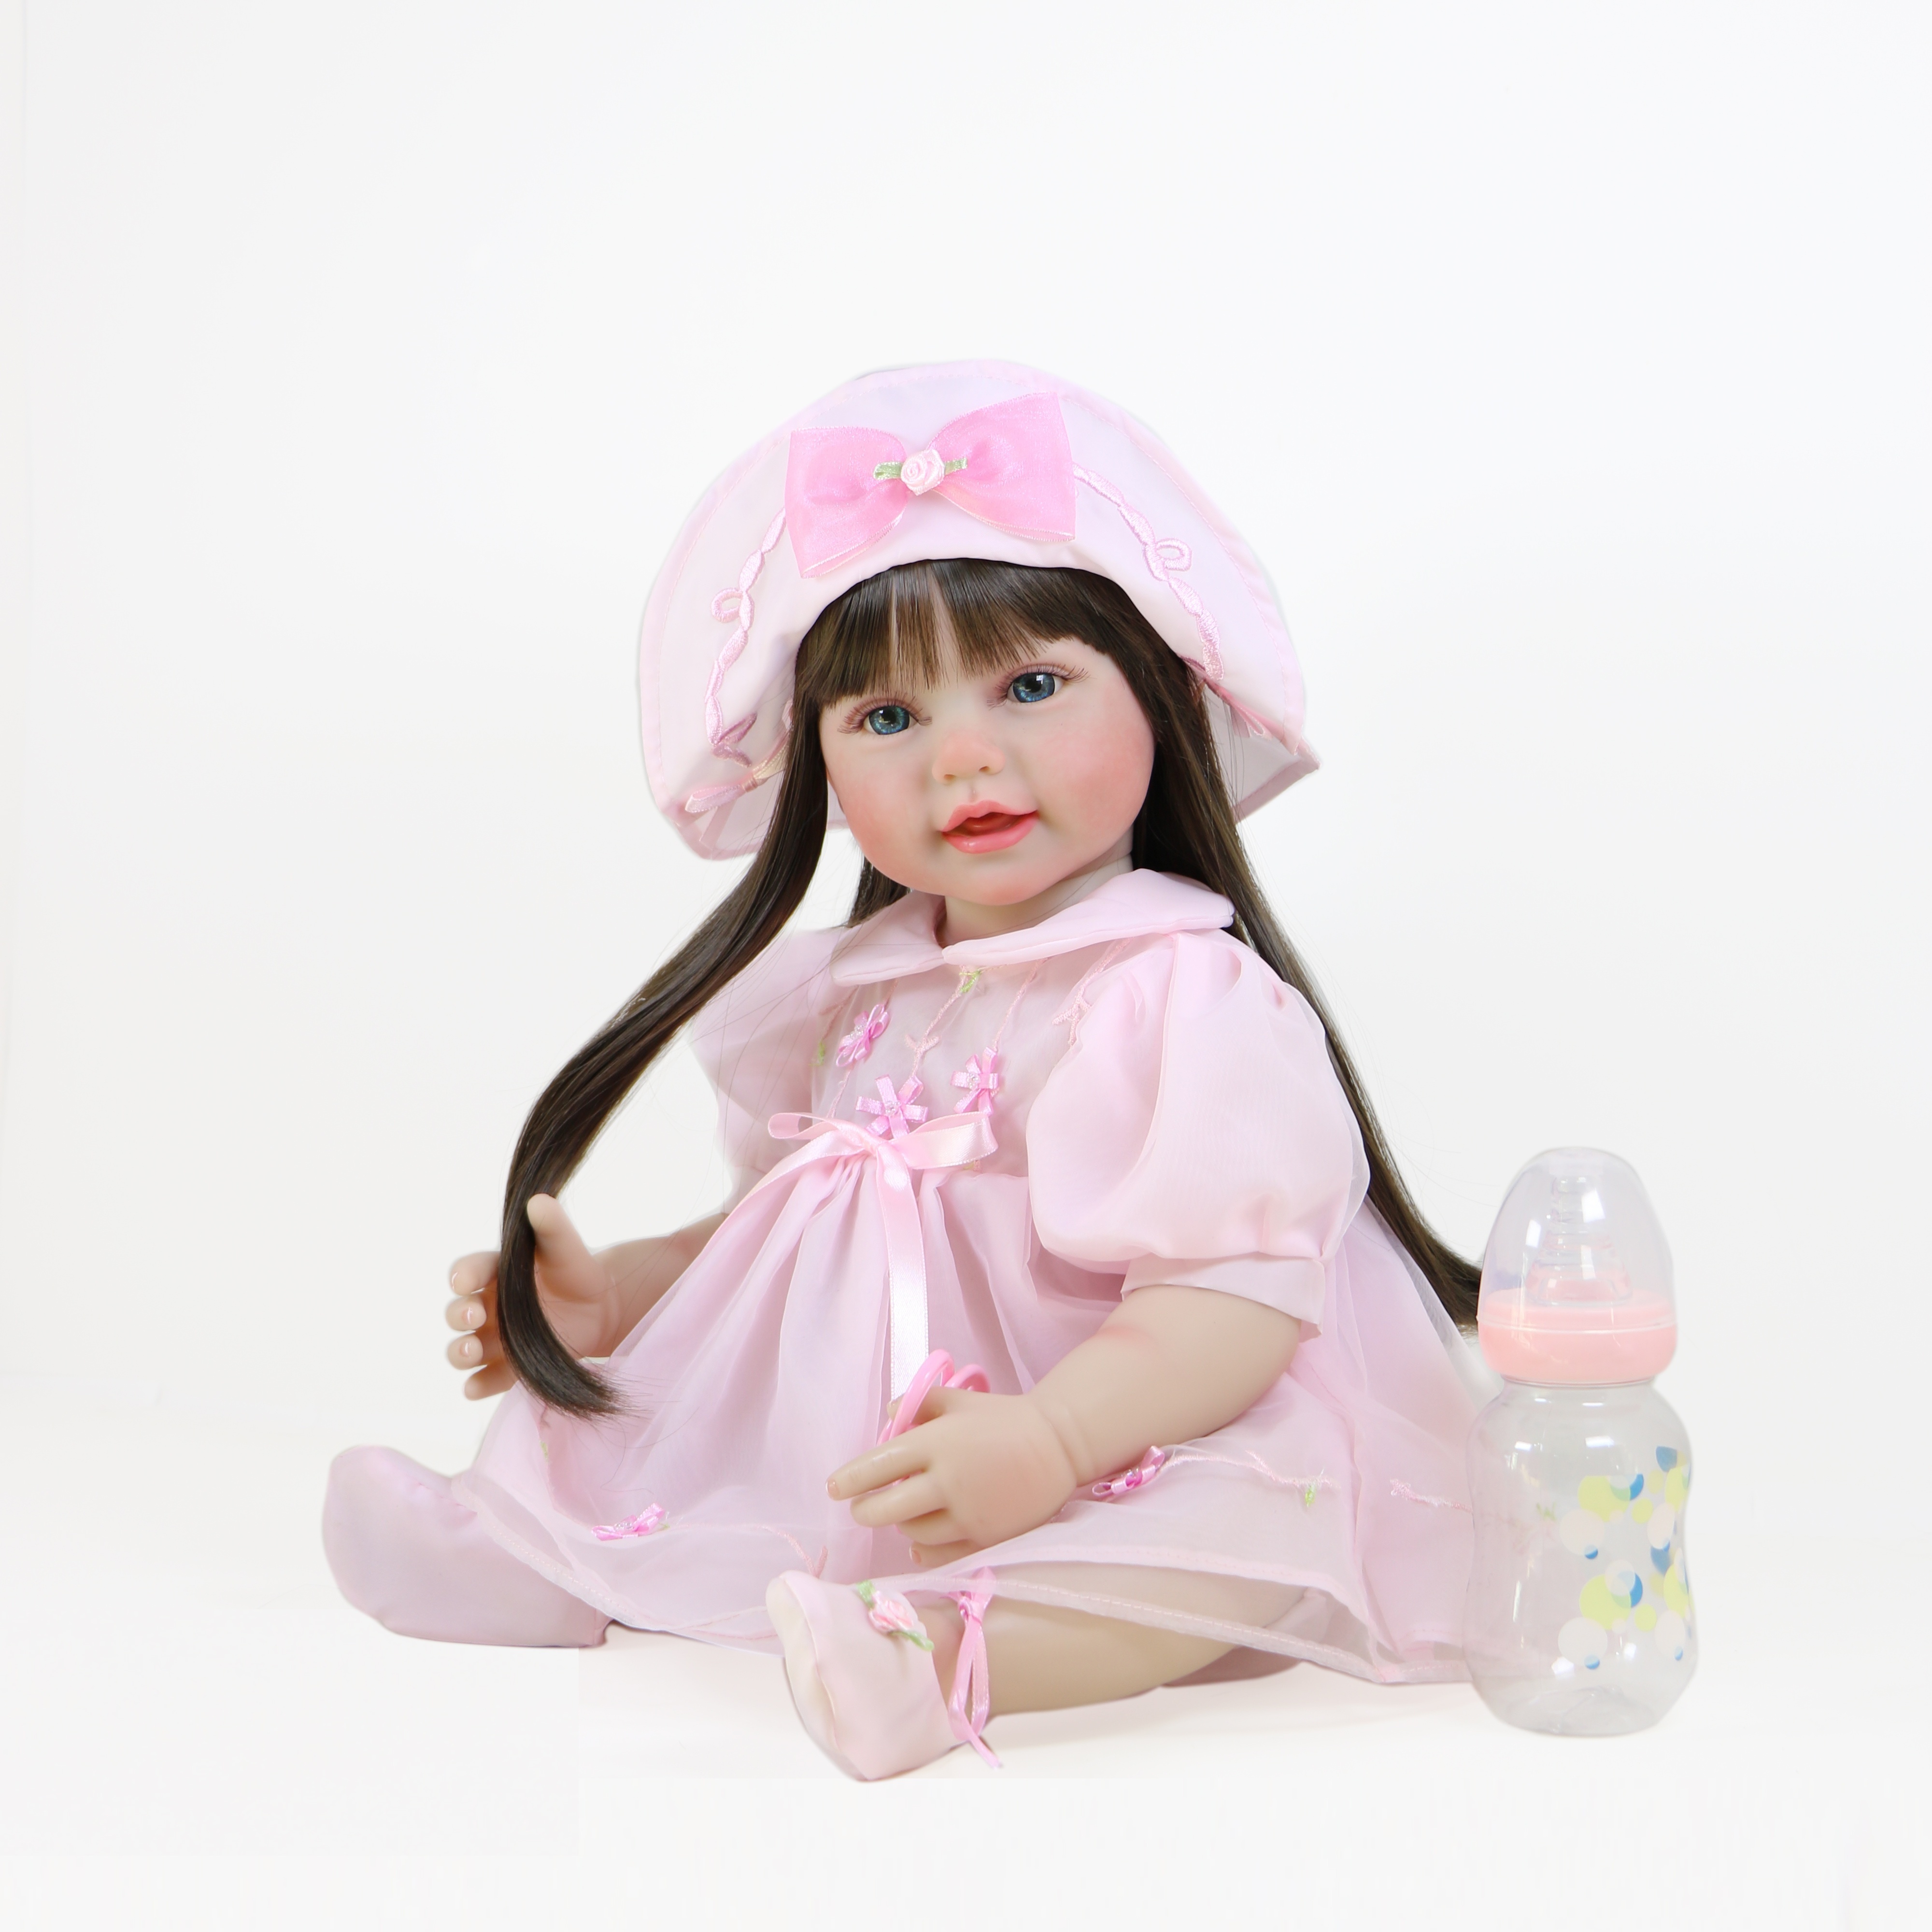 22 Inch Sunshine Dall With 3D Painted Skin Visible Veins And Soft Full  Vinyl With Brown Long Hair And Blue Eyes. Hand Make Princess Dress.